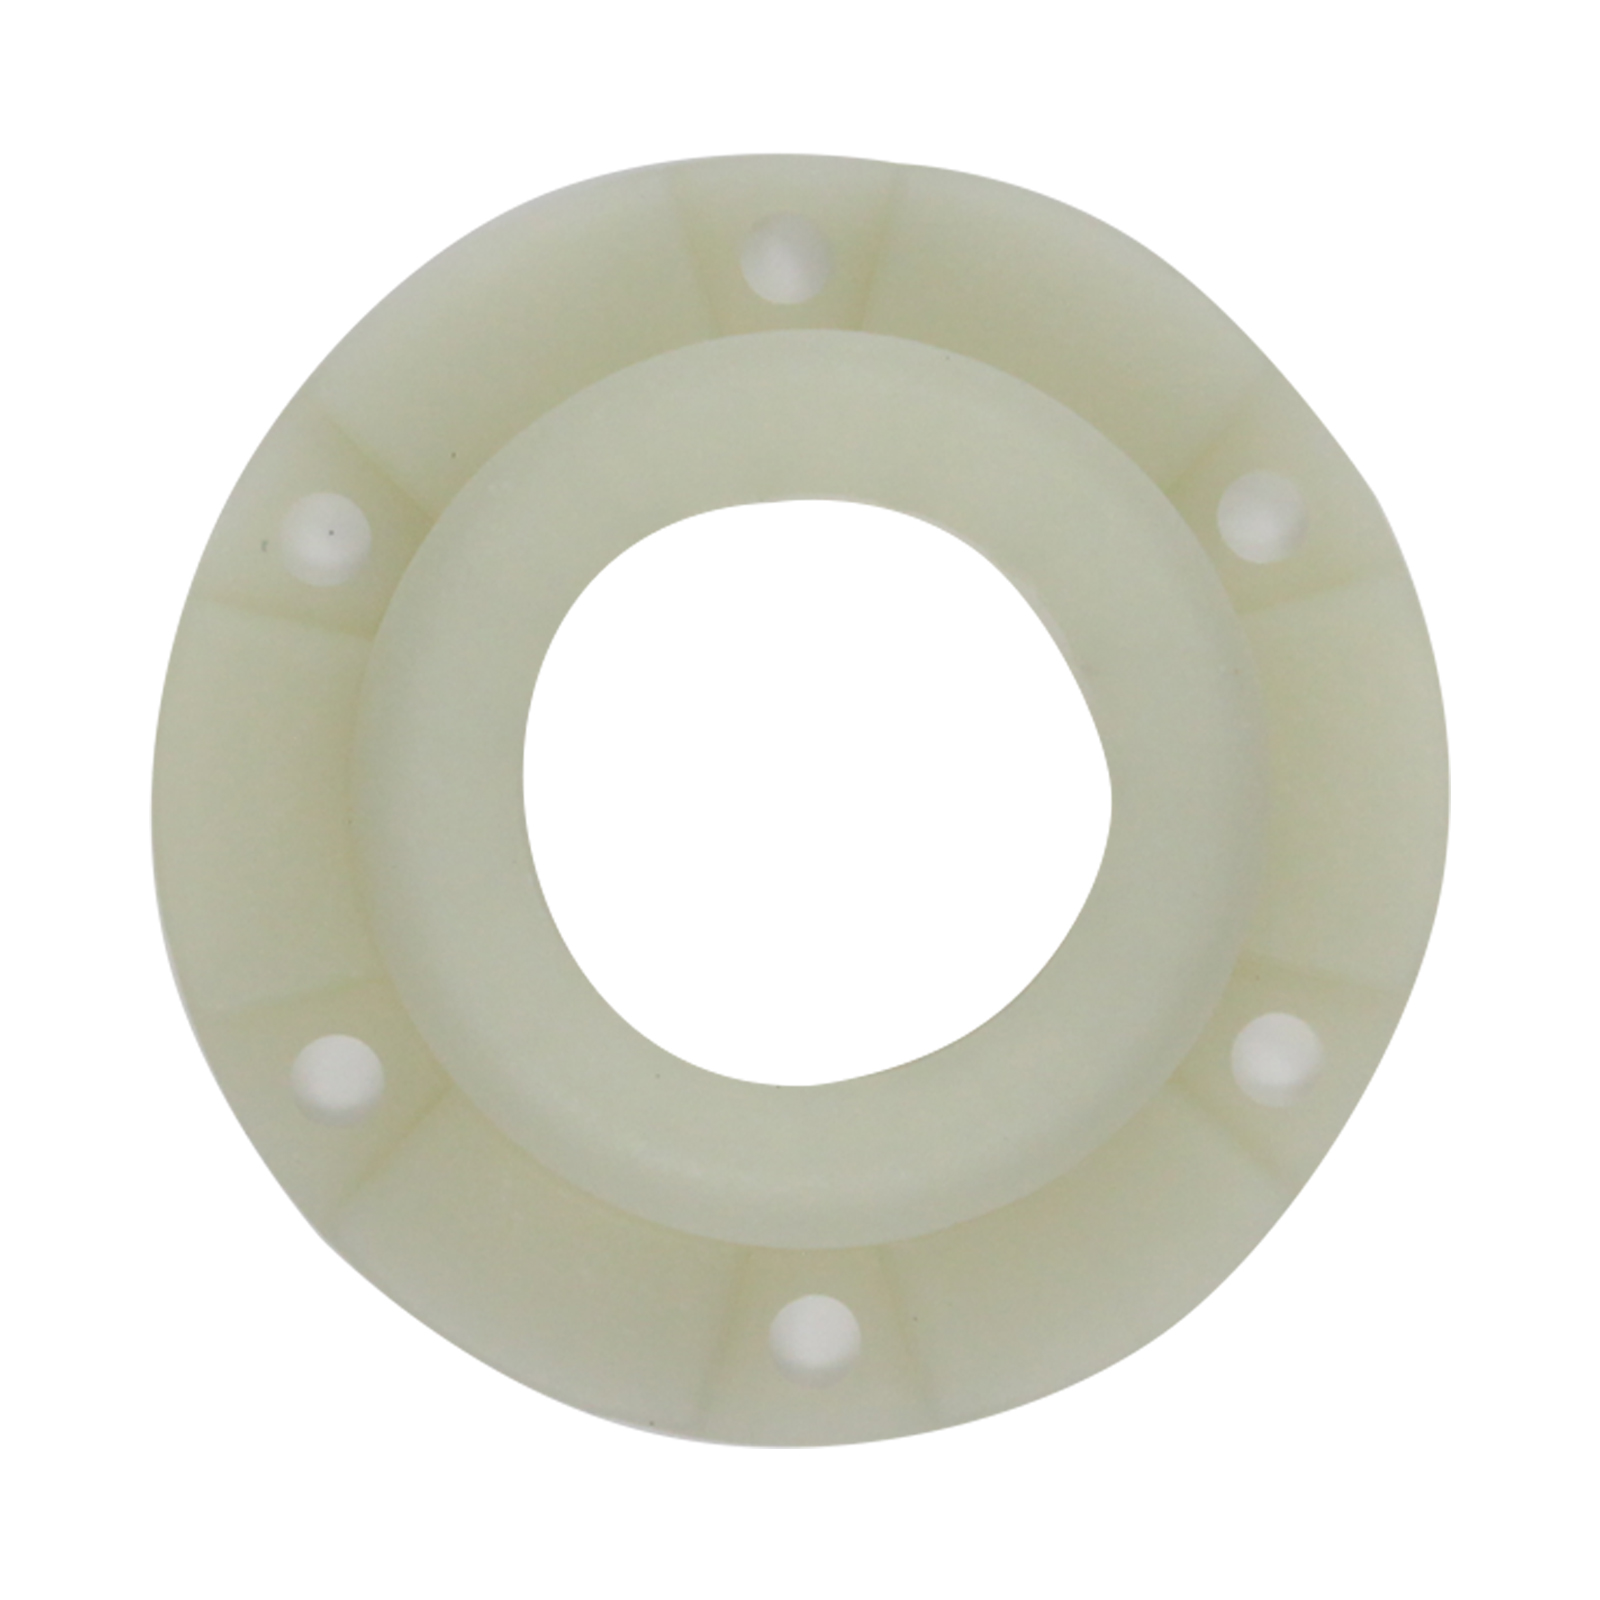 W10820039 Hub Kit Replacement for Kenmore / Sears 11028042700 Washer - Compatible with 280145 Basket Hub Kit - UpStart Components Brand - image 3 of 4